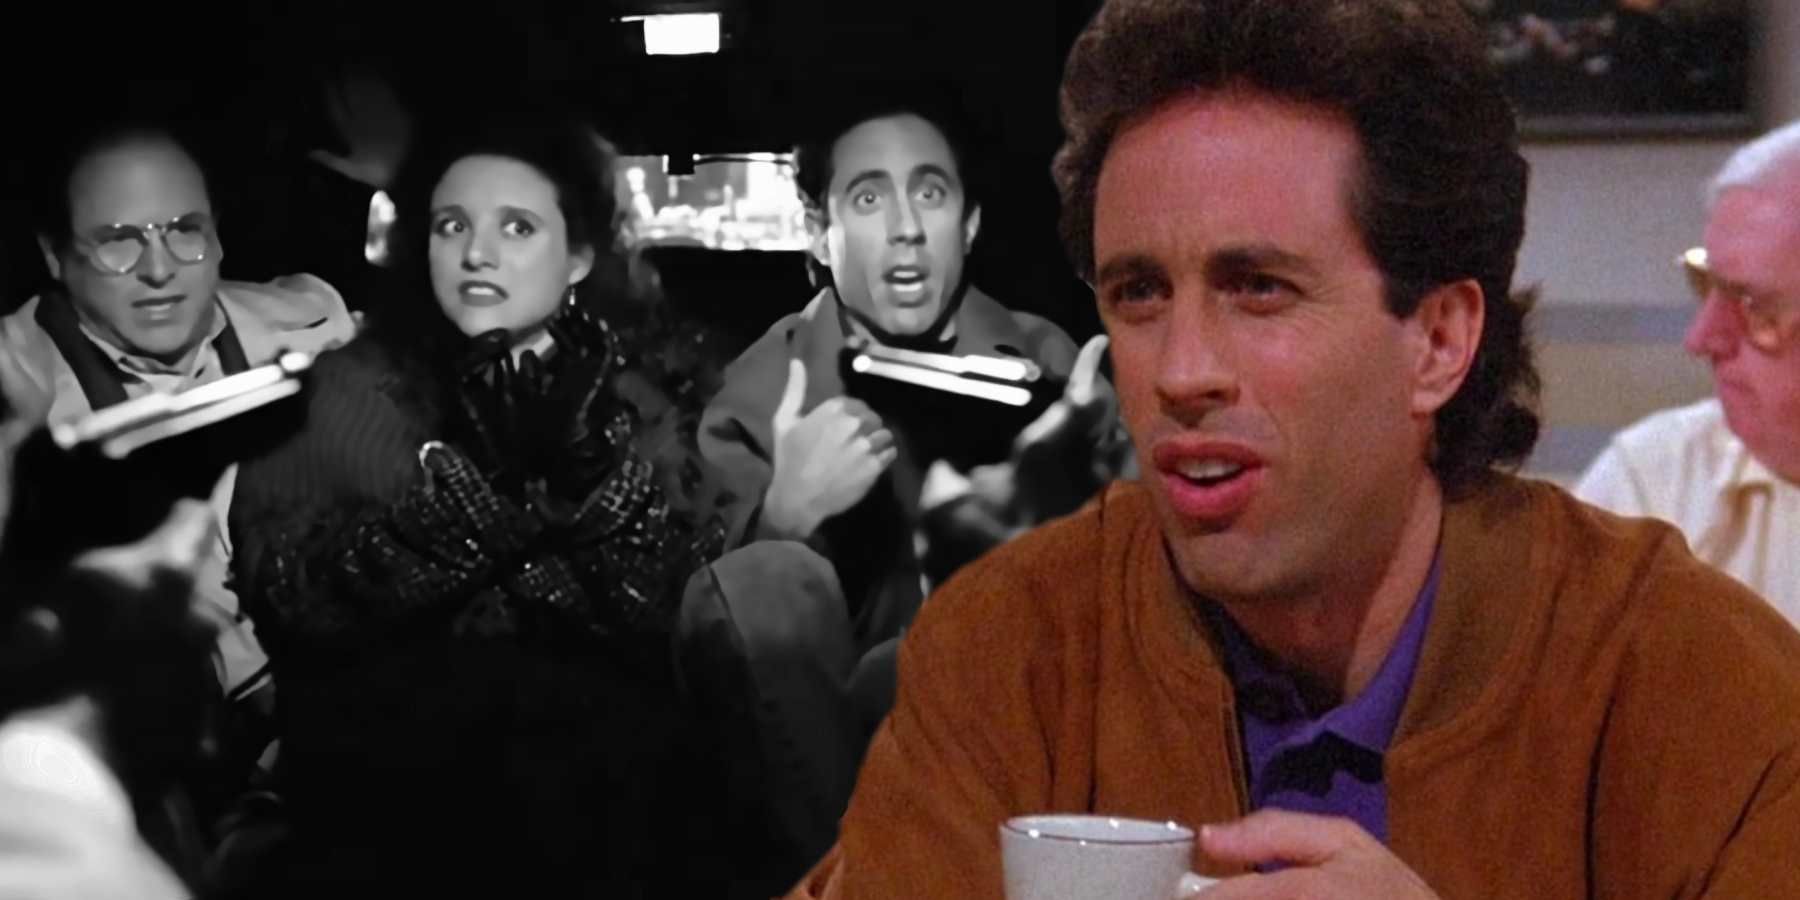 Seinfeld's 'The Gun' and salad episodes were scrapped